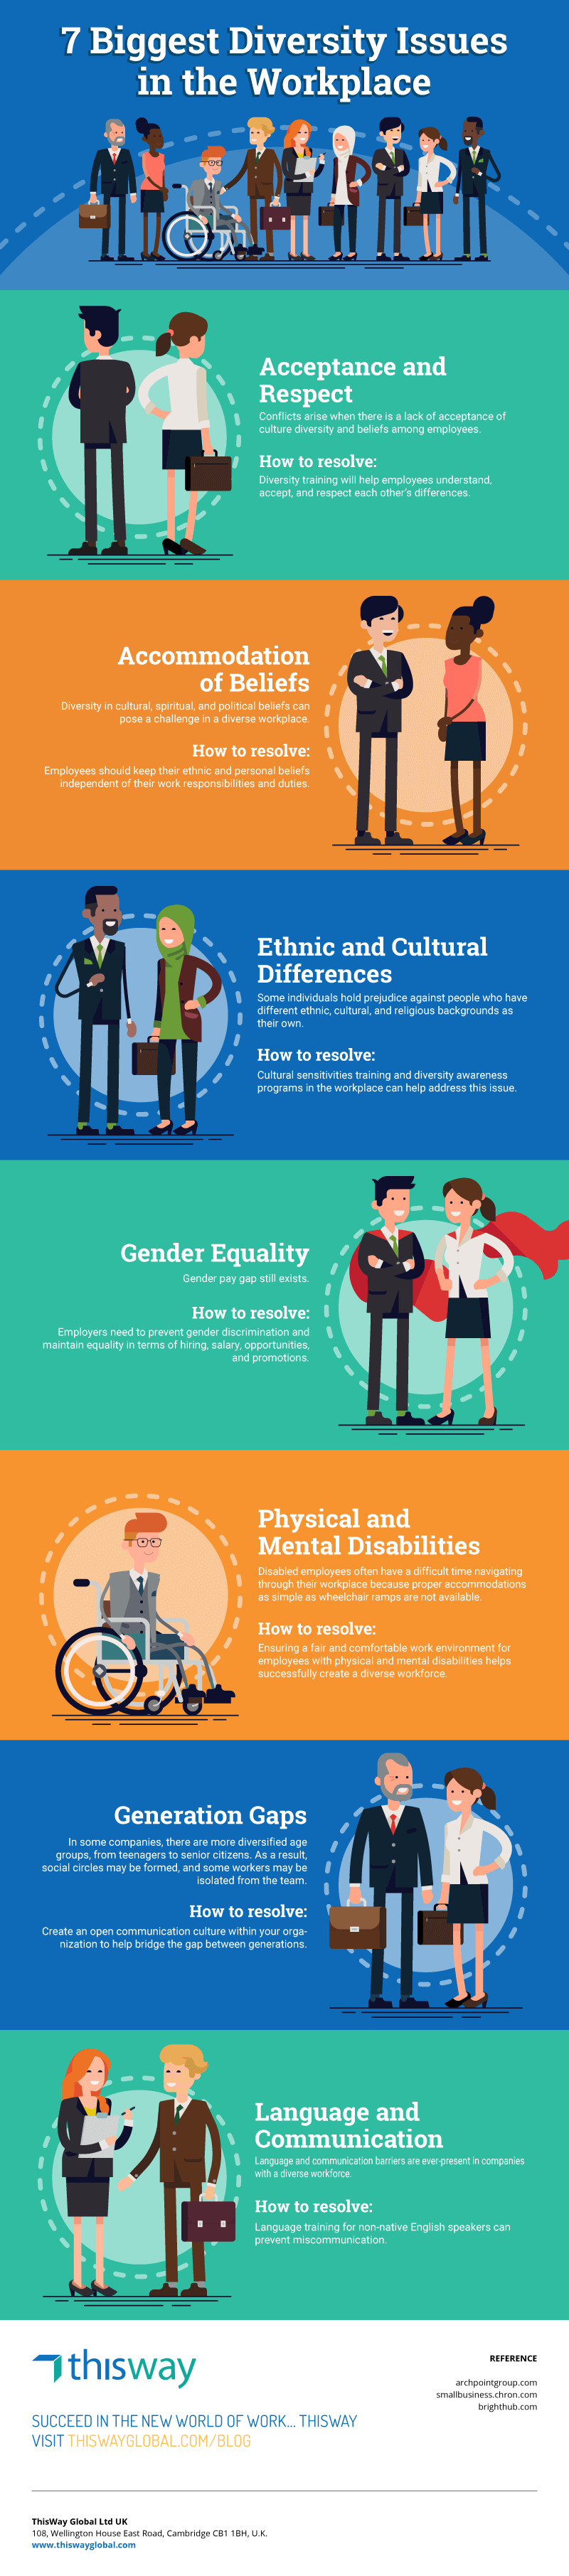 7-Biggest-Diversity-Issues-in-The-Workplace